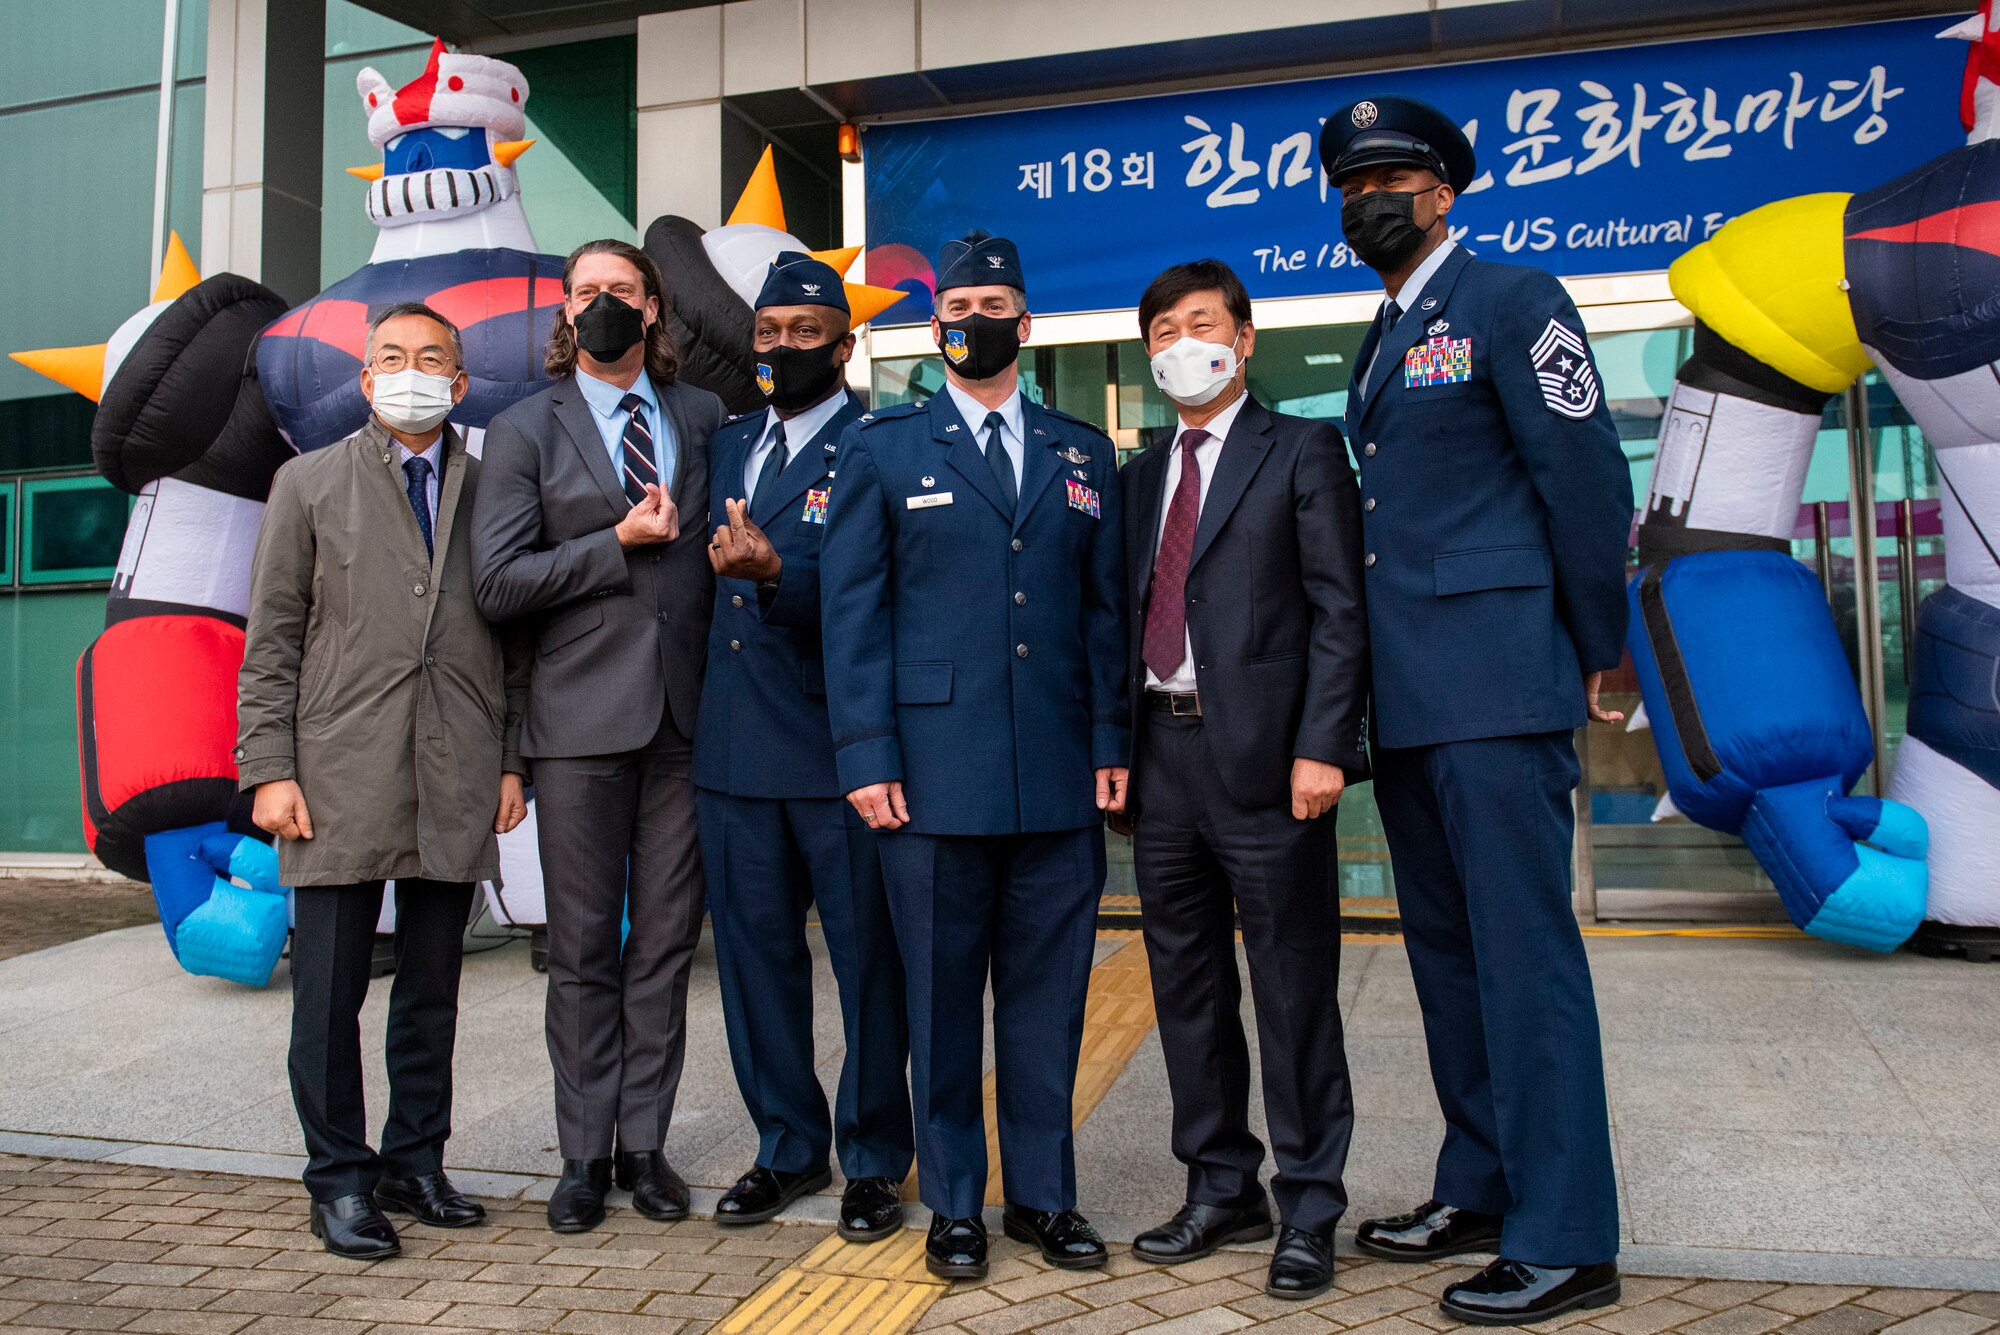 Col. Joshua Wood, 51st Fighter Wing commander, middle, Col. Henry Jeffress, 51st FW vice commander, middle left, Mr. Jang-seon Jung, Pyongtaek City mayor, middle right, and Chief Master Sgt. Alvin Dyer, 7th Air Force command chief, far right, pose for a photo